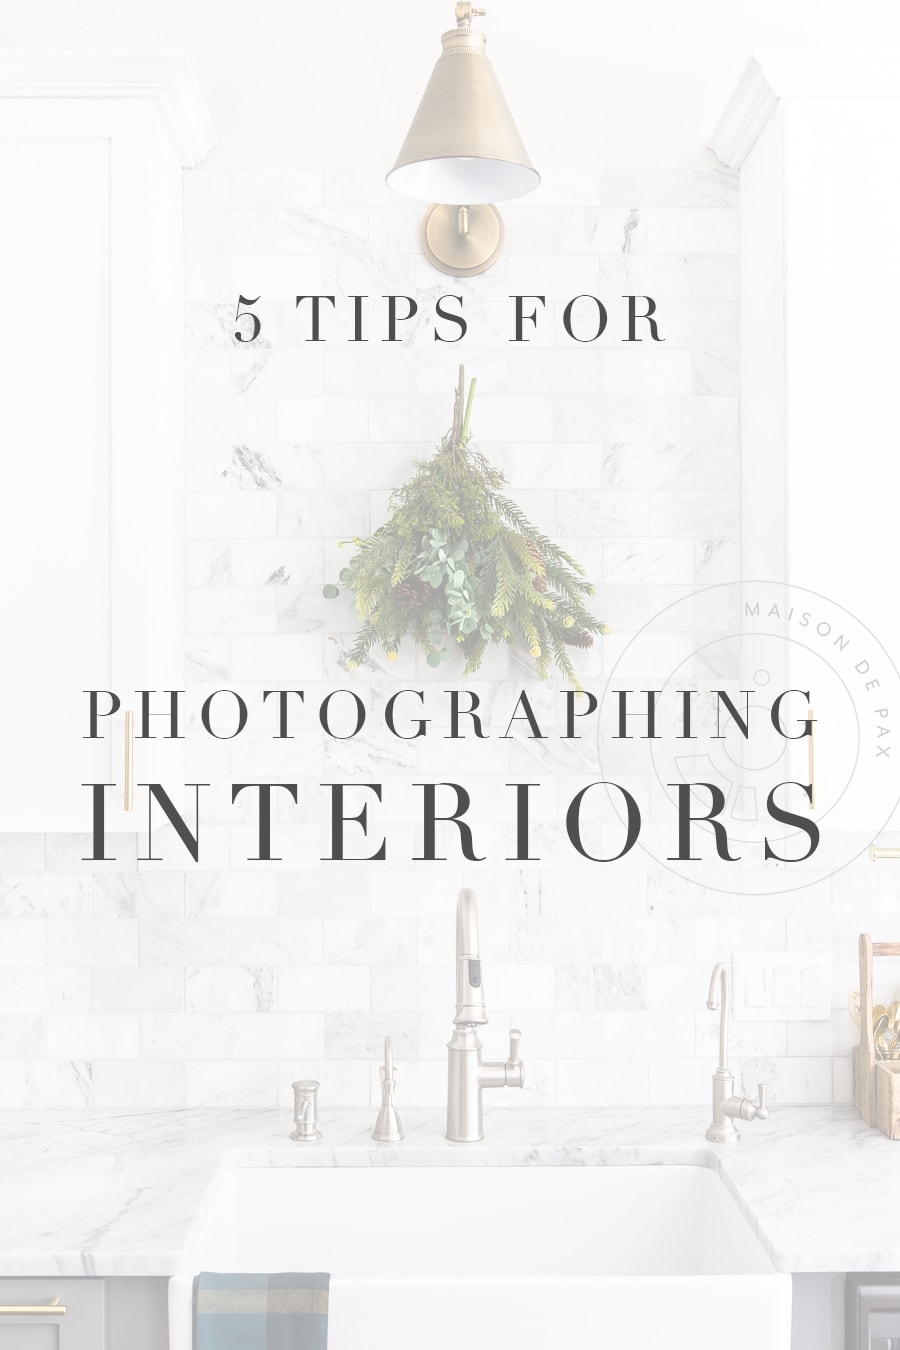 5 Tips for Photographing Interiors